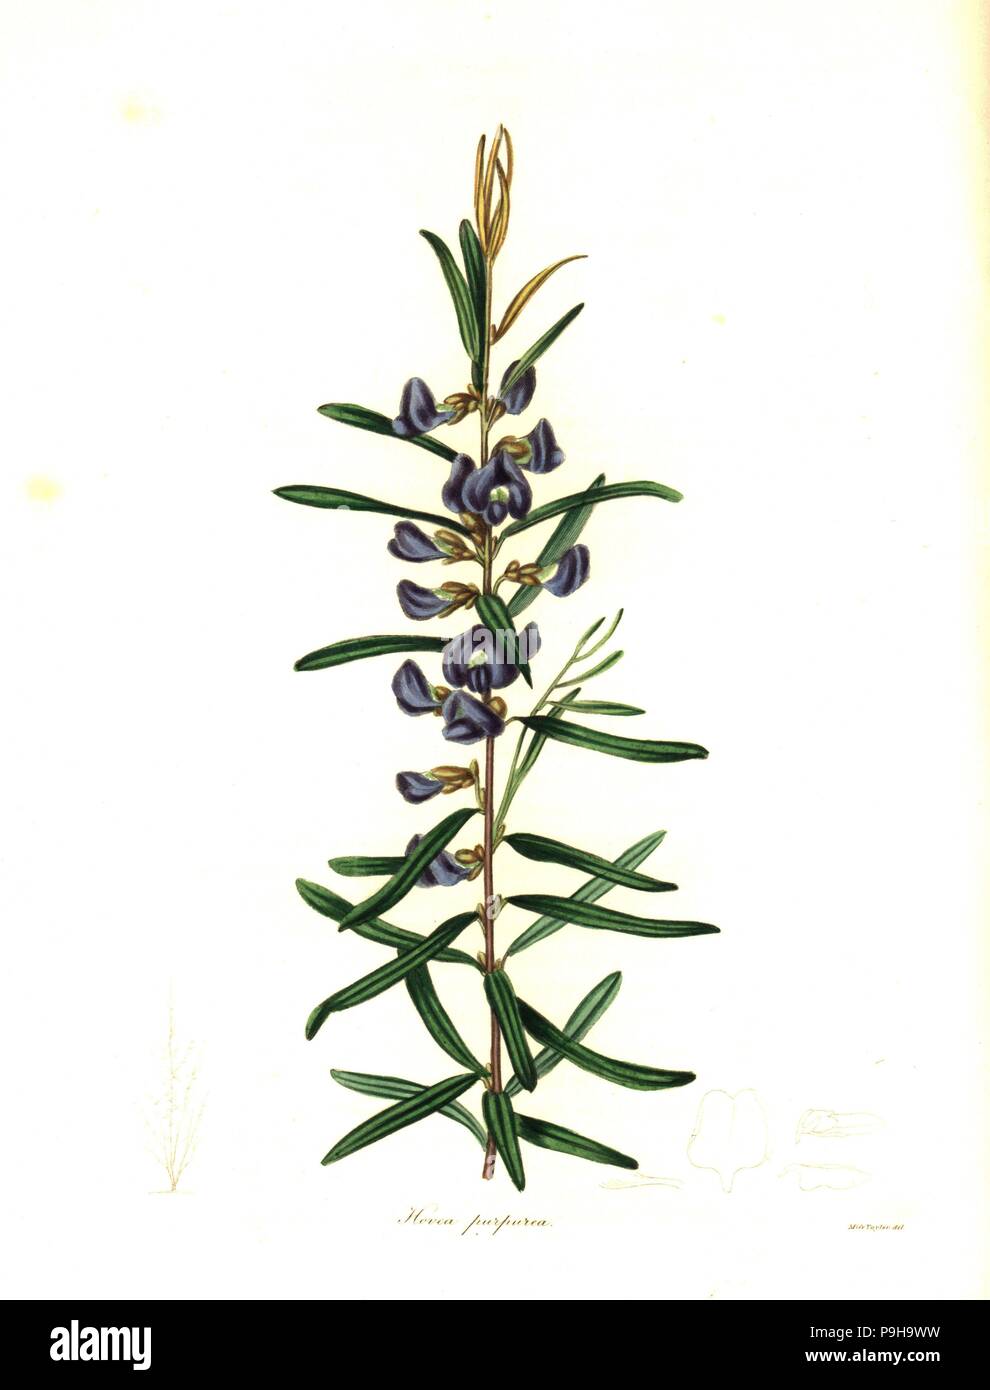 Purple pea or purple-flowered hovea, Hovea purpurea.Handcoloured copperplate engraving after a botanical illustration by Miss Jane Taylor from Benjamin Maund and the Rev. John Stevens Henslow's The Botanist, London, 1836. Stock Photo